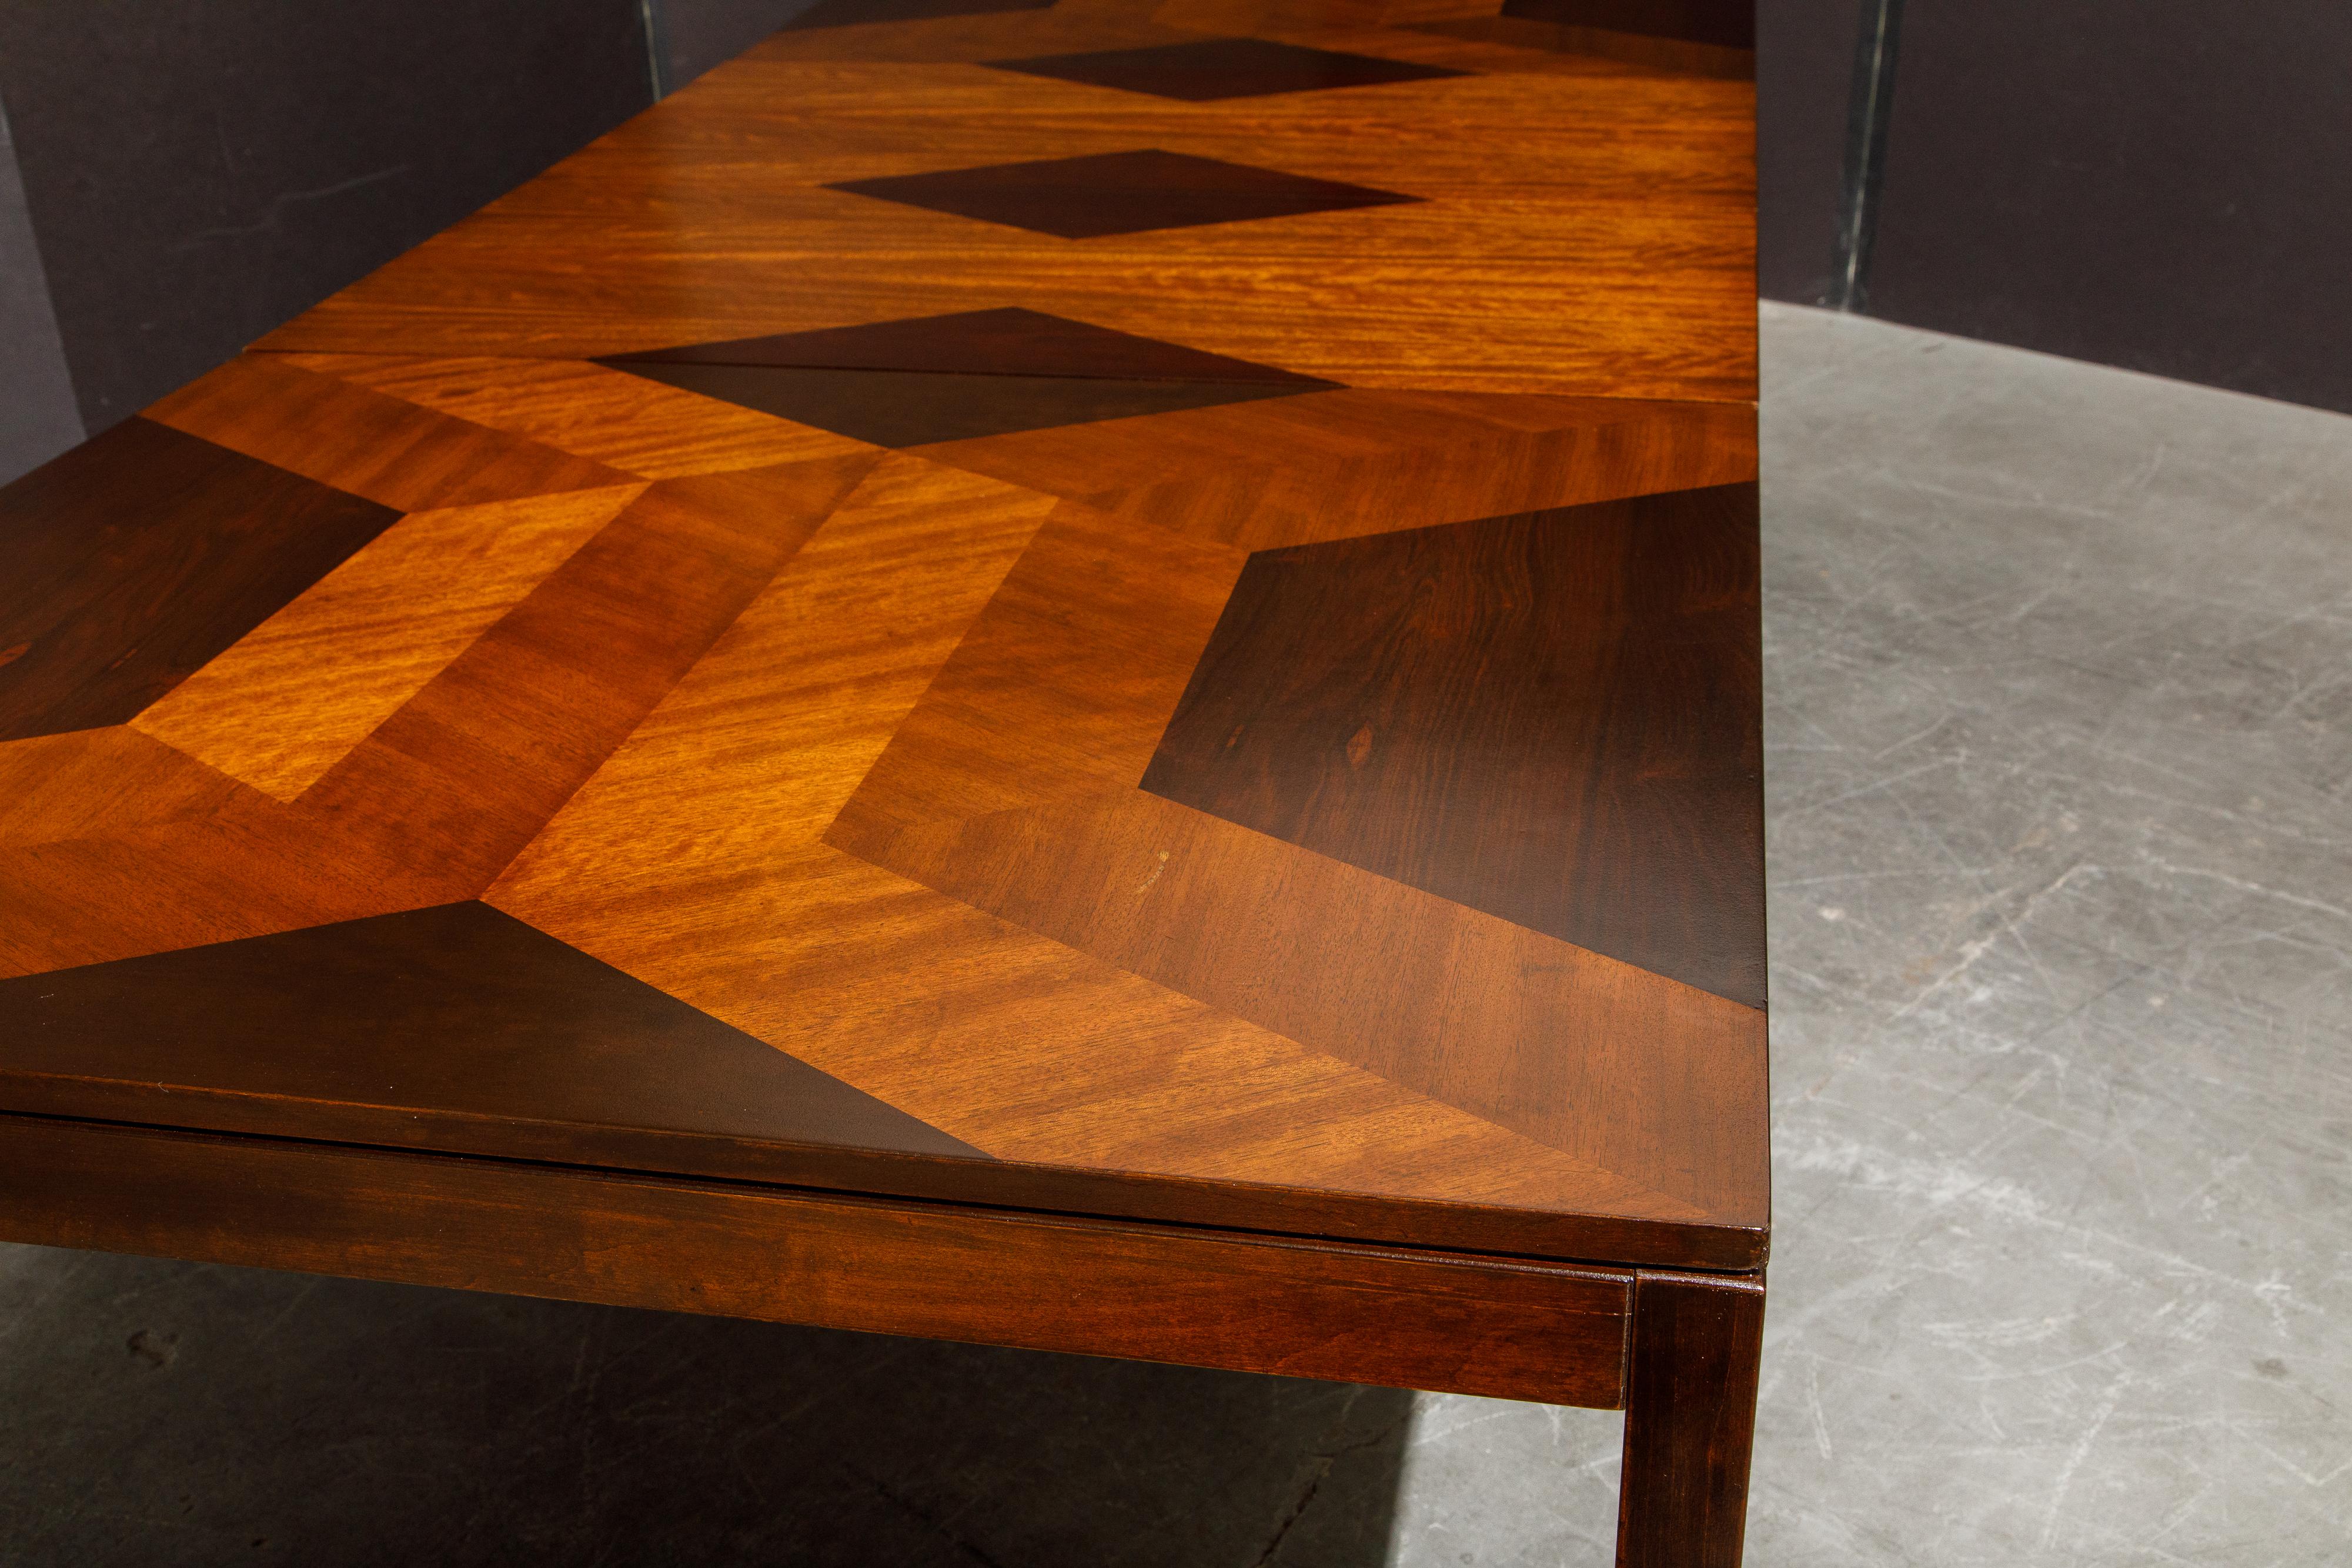 20th Century Exotic Mixed Woods Dining Table by Milo Baughman for Directional, circa 1970